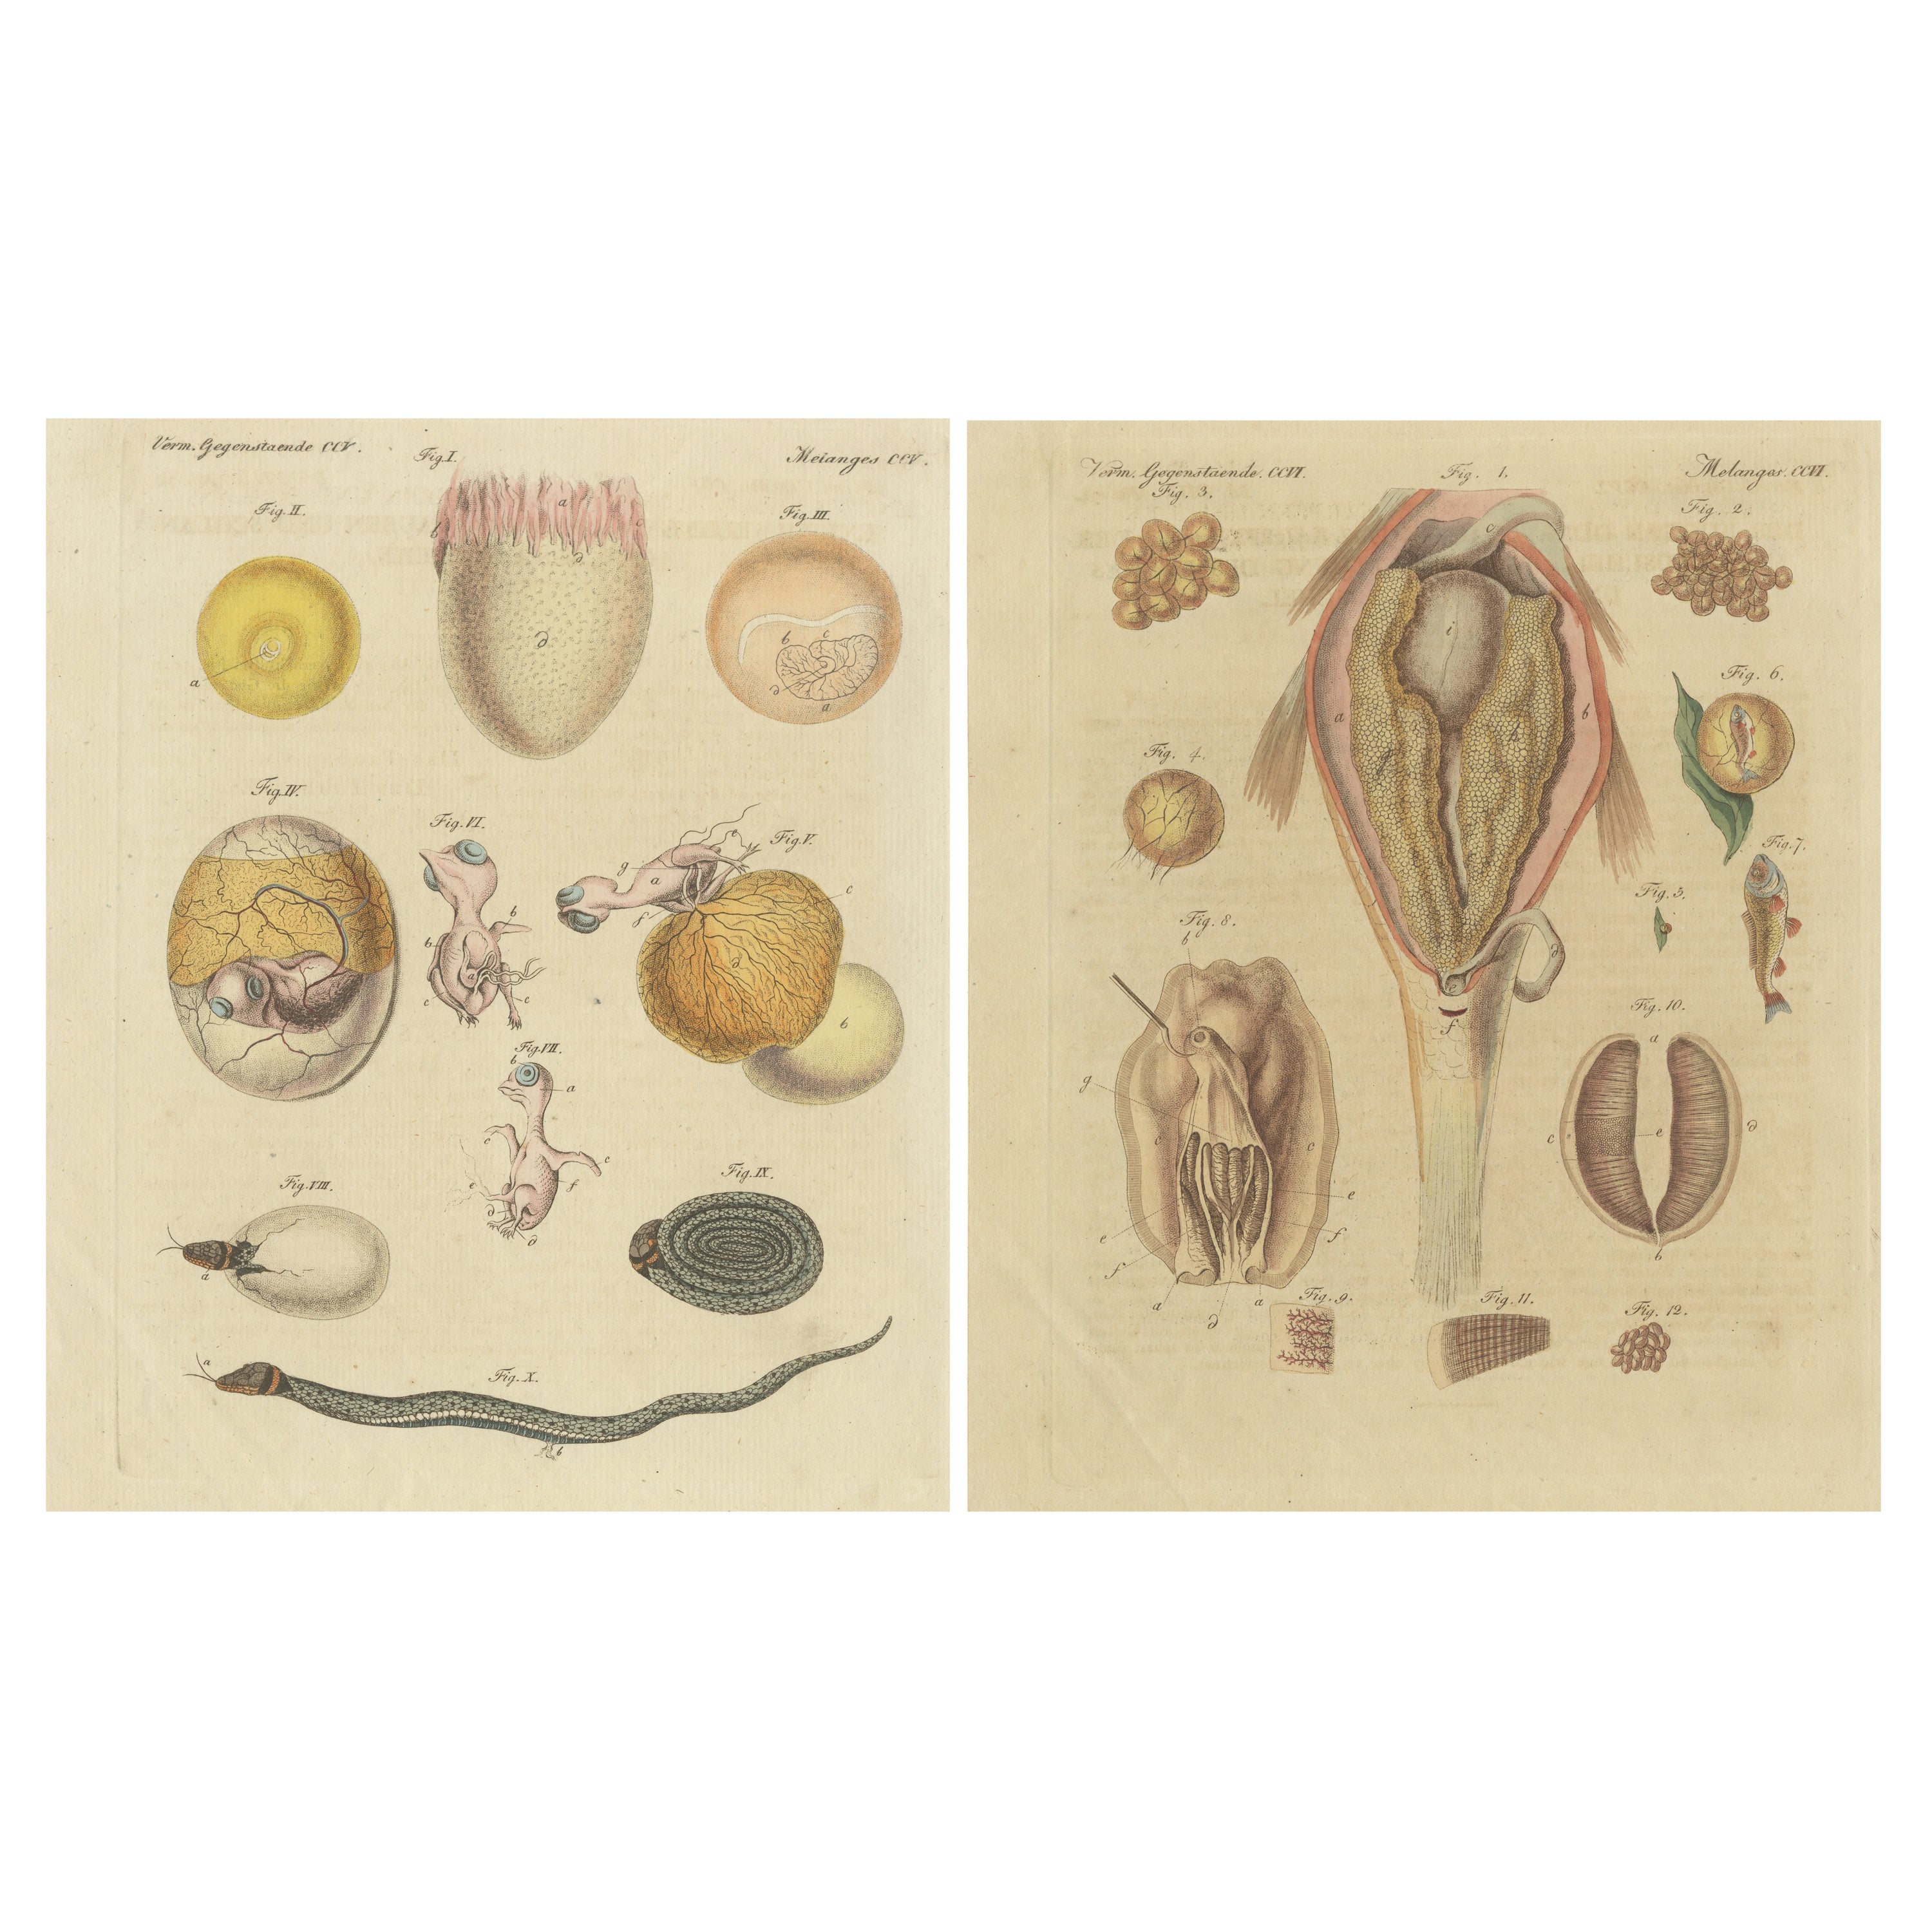 Set of Two Antique Prints of Embryos of a Chicken, Pigeon, Snake, Fish & Others